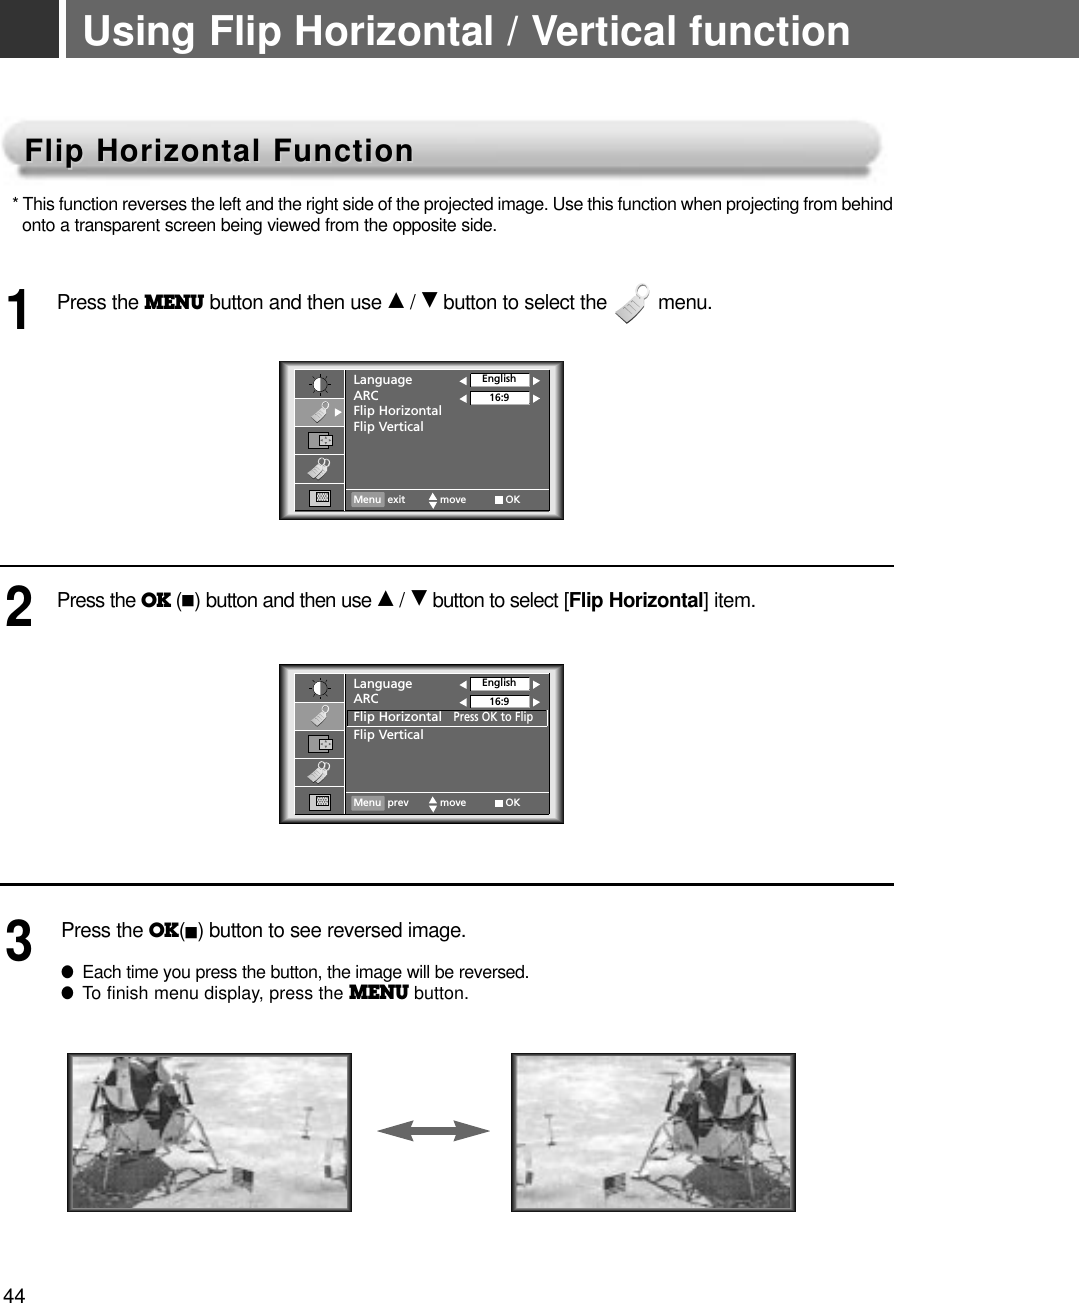 44Using Flip Horizontal / Vertical functionFlip Horizontal FunctionFlip Horizontal Function* This function reverses the left and the right side of the projected image. Use this function when projecting from behind  onto a transparent screen being viewed from the opposite side.Press the MENU button and then use D/ Ebutton to select the         menu.1Press the OK (A)button and then use D/ Ebutton to select [Flip Horizontal] item.Press the OK(A)button to see reversed image.●Each time you press the button, the image will be reversed.●To finish menu display, press the MENU button.23LanguageARCFlip HorizontalFlip VerticalEnglish16:9Menu exit move OKLanguageARCFlip HorizontalPress OK to FlipFlip VerticalEnglish16:9Menu prev move OK